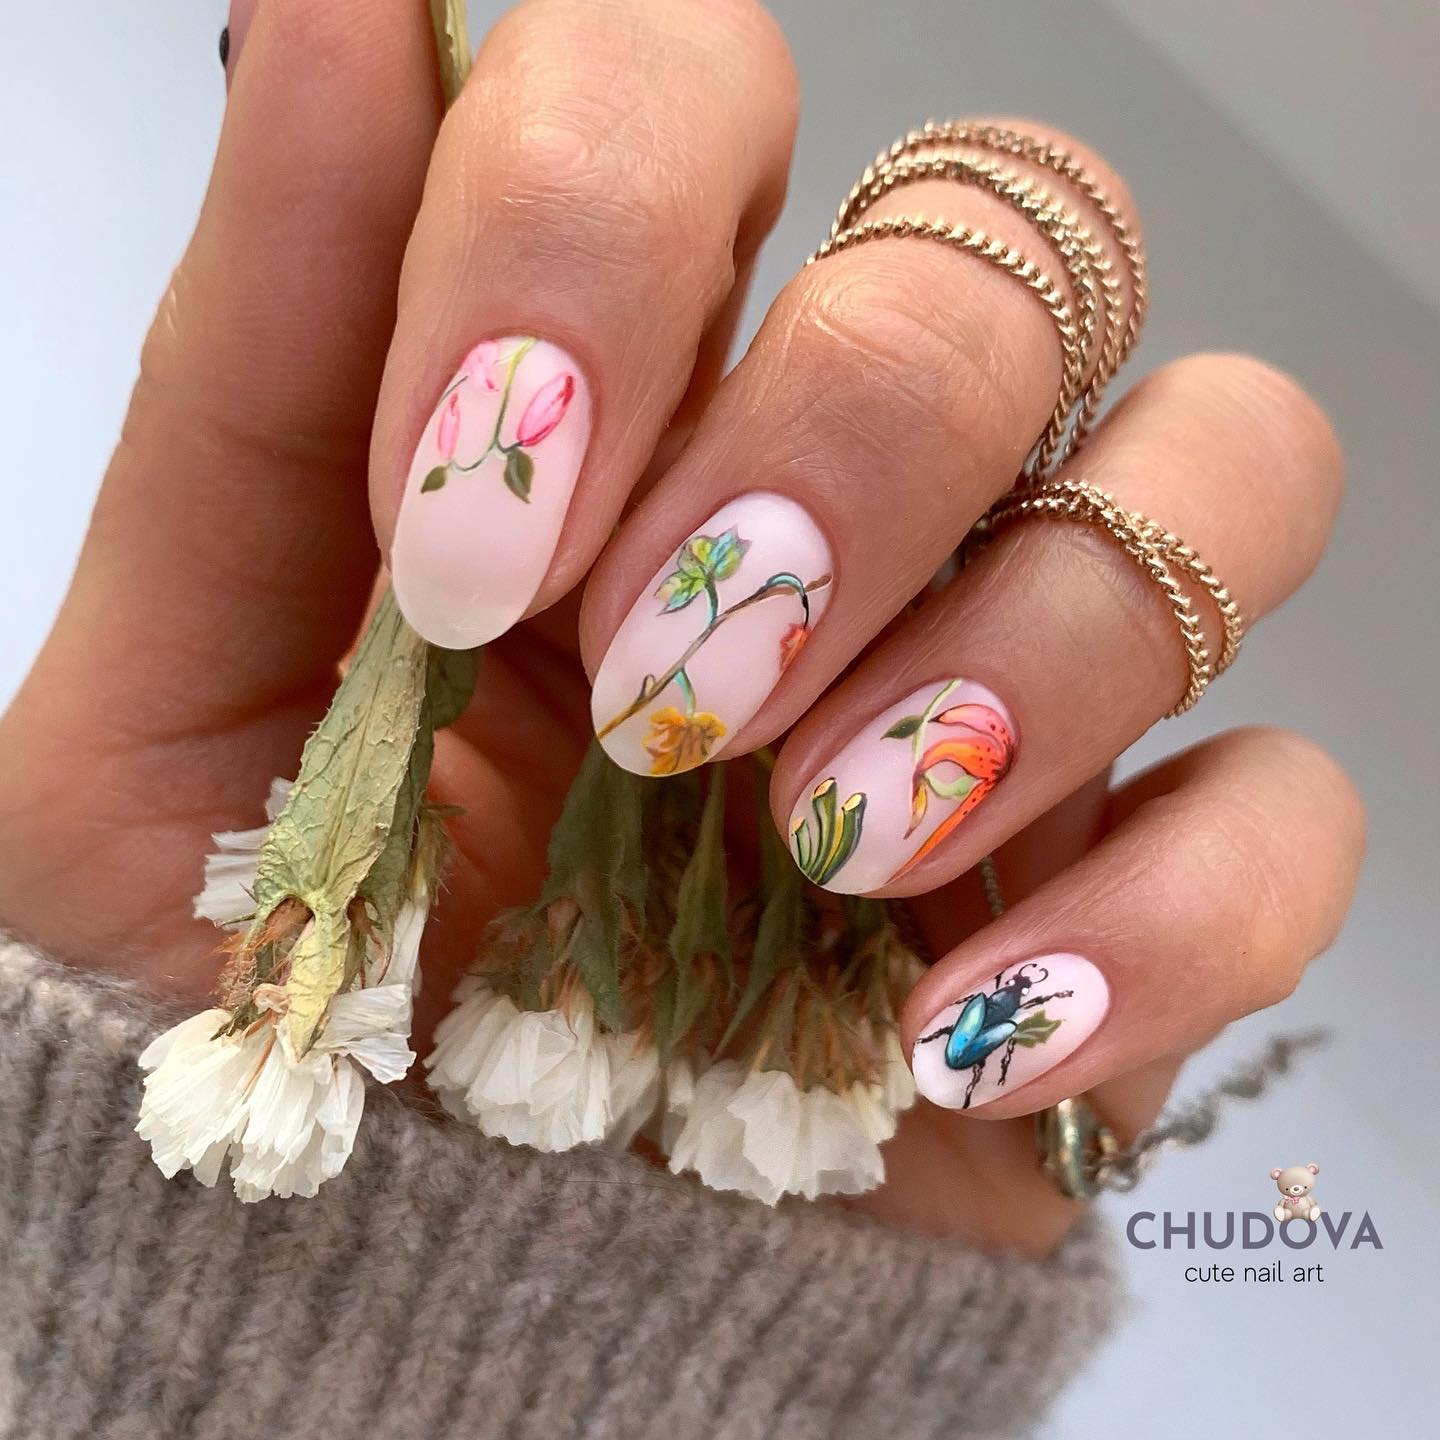 Short Nails with Floral Design